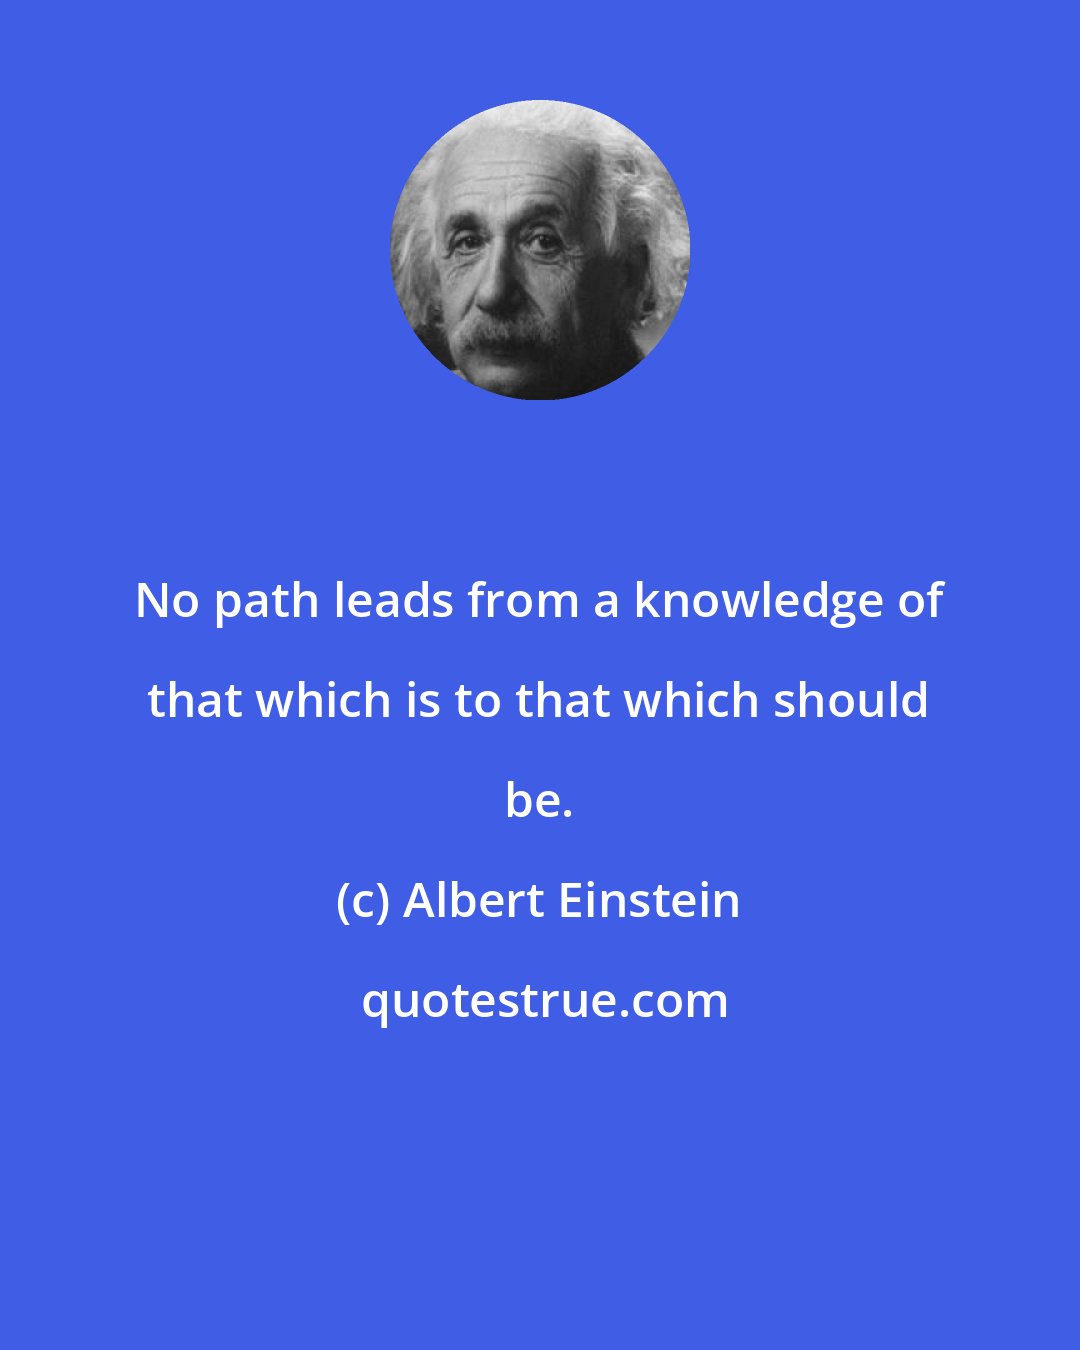 Albert Einstein: No path leads from a knowledge of that which is to that which should be.